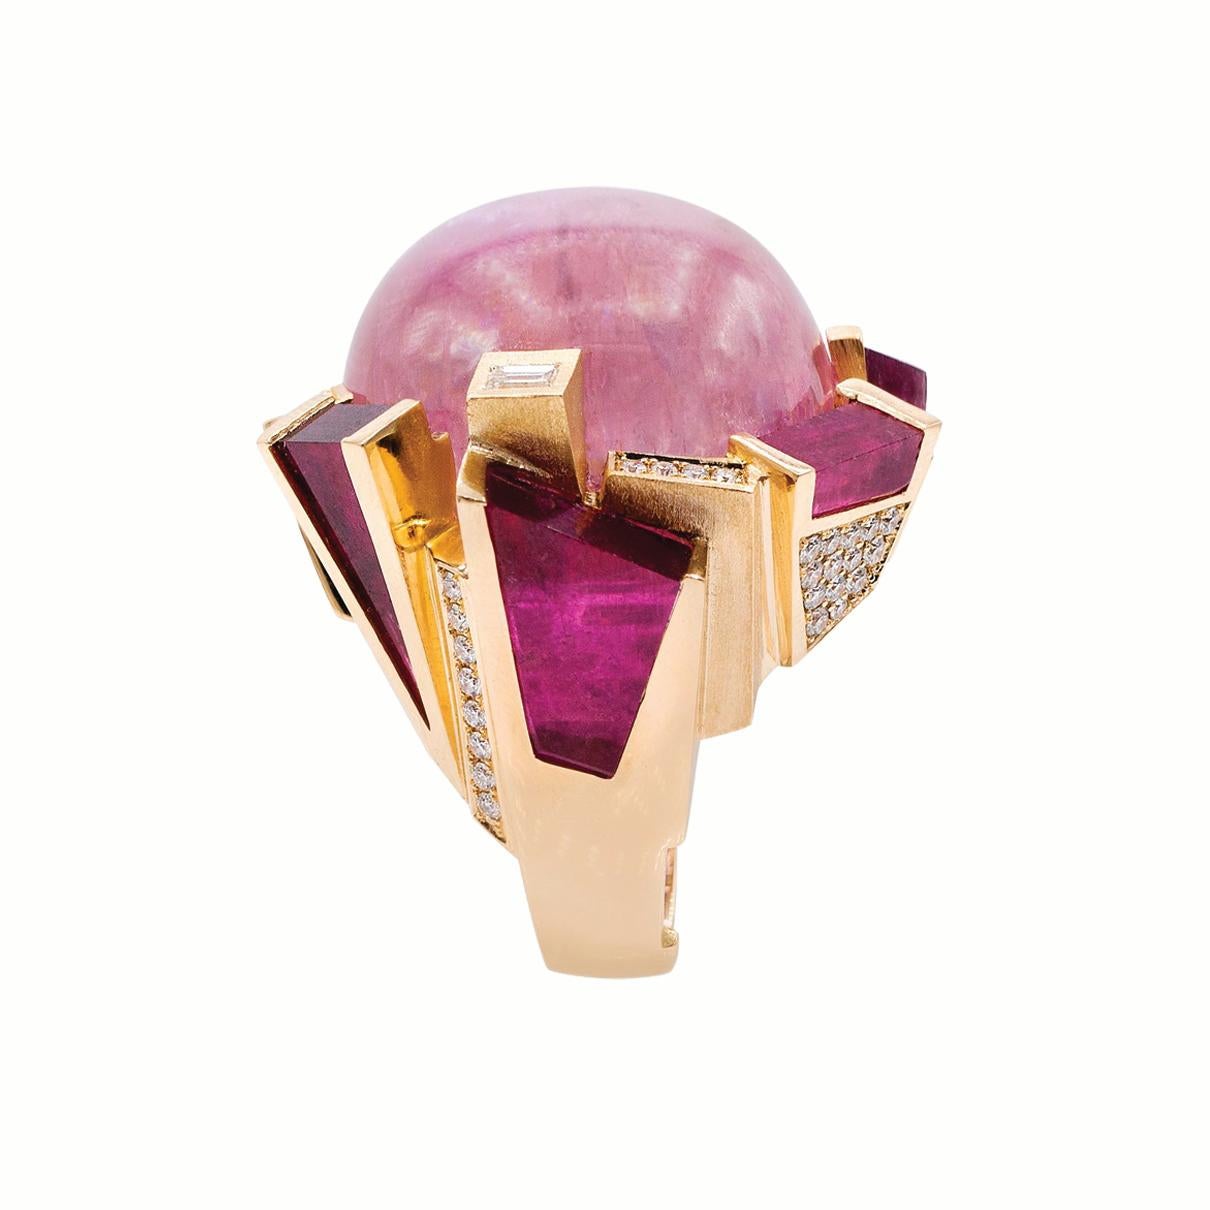 White Diamonds (round and baguettes) 0.85 cts - Kunzite Oval 77.86 cts - Rubellite sliced fancy shape 6  pcs 20.13 cts  

Our Plateaux Ring is inspired by our 